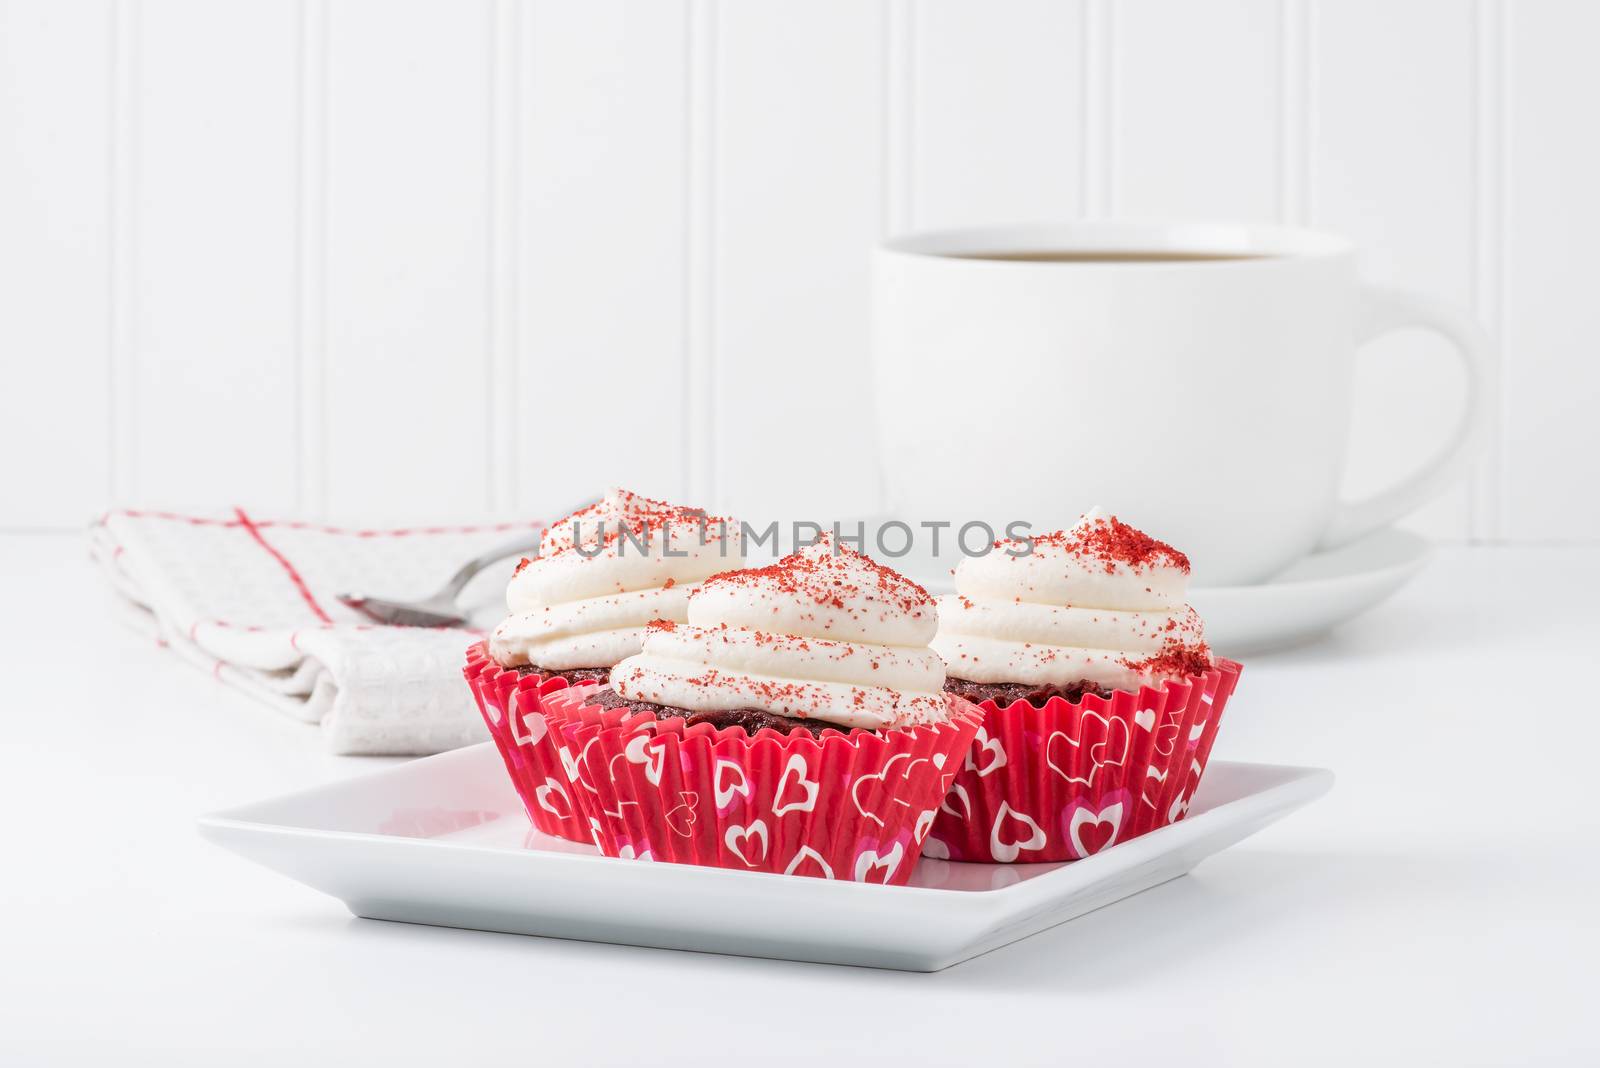 Three Red Velvet Cupcakes by billberryphotography